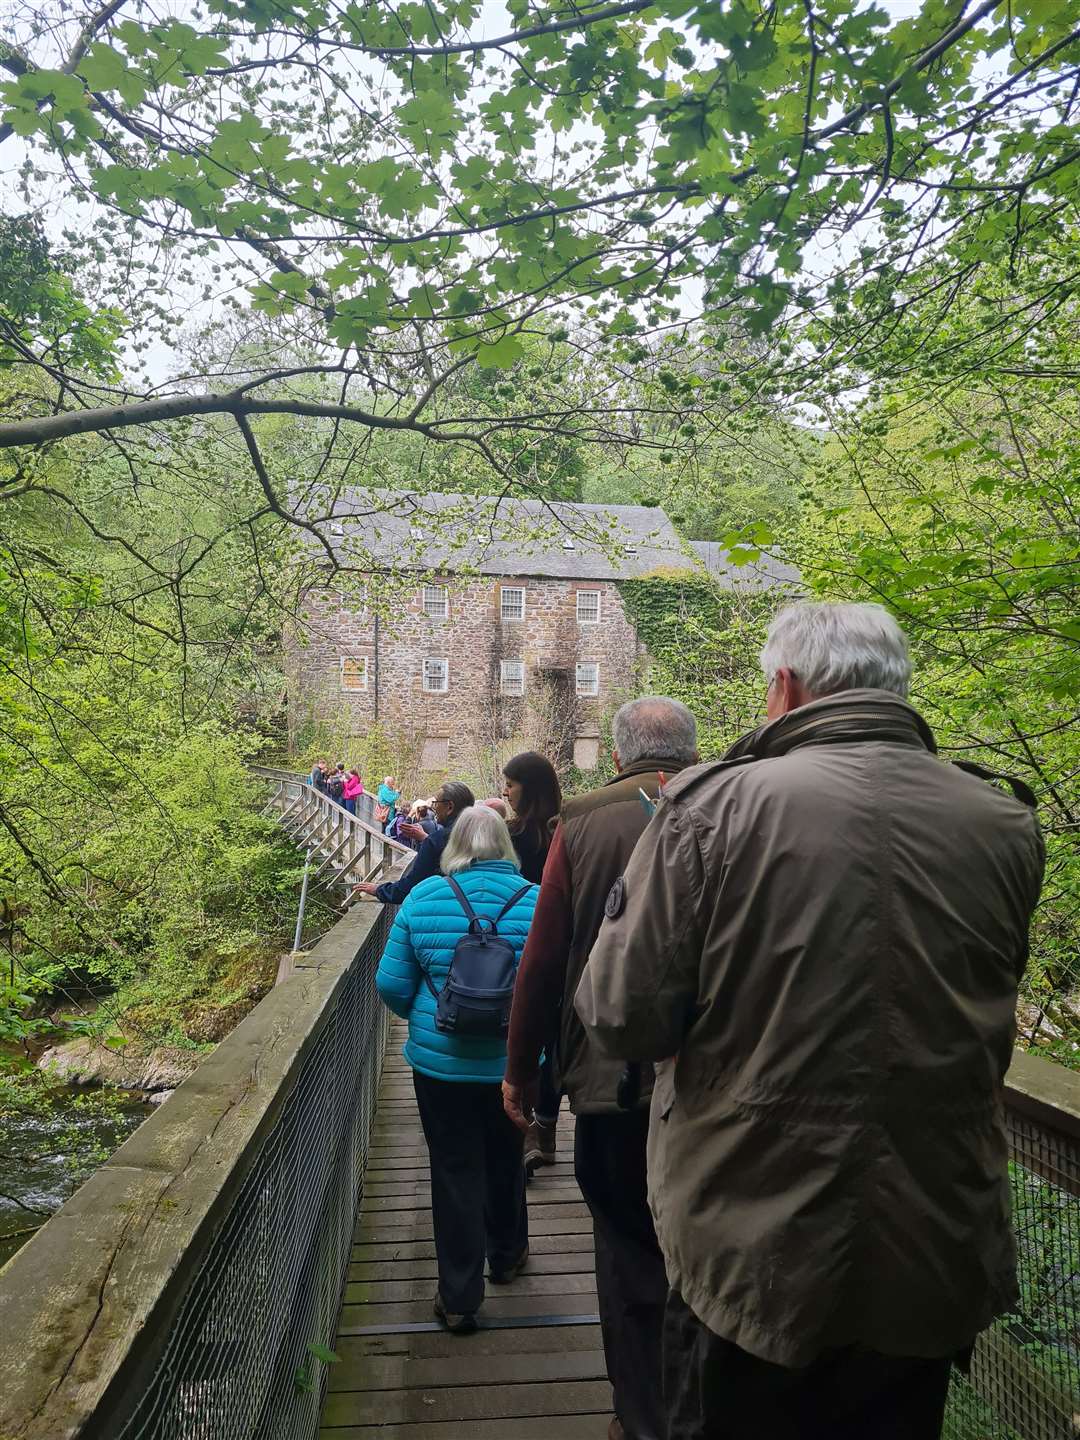 Conference delegates walking towards a historic mill on the River Ericht in Perthshire.